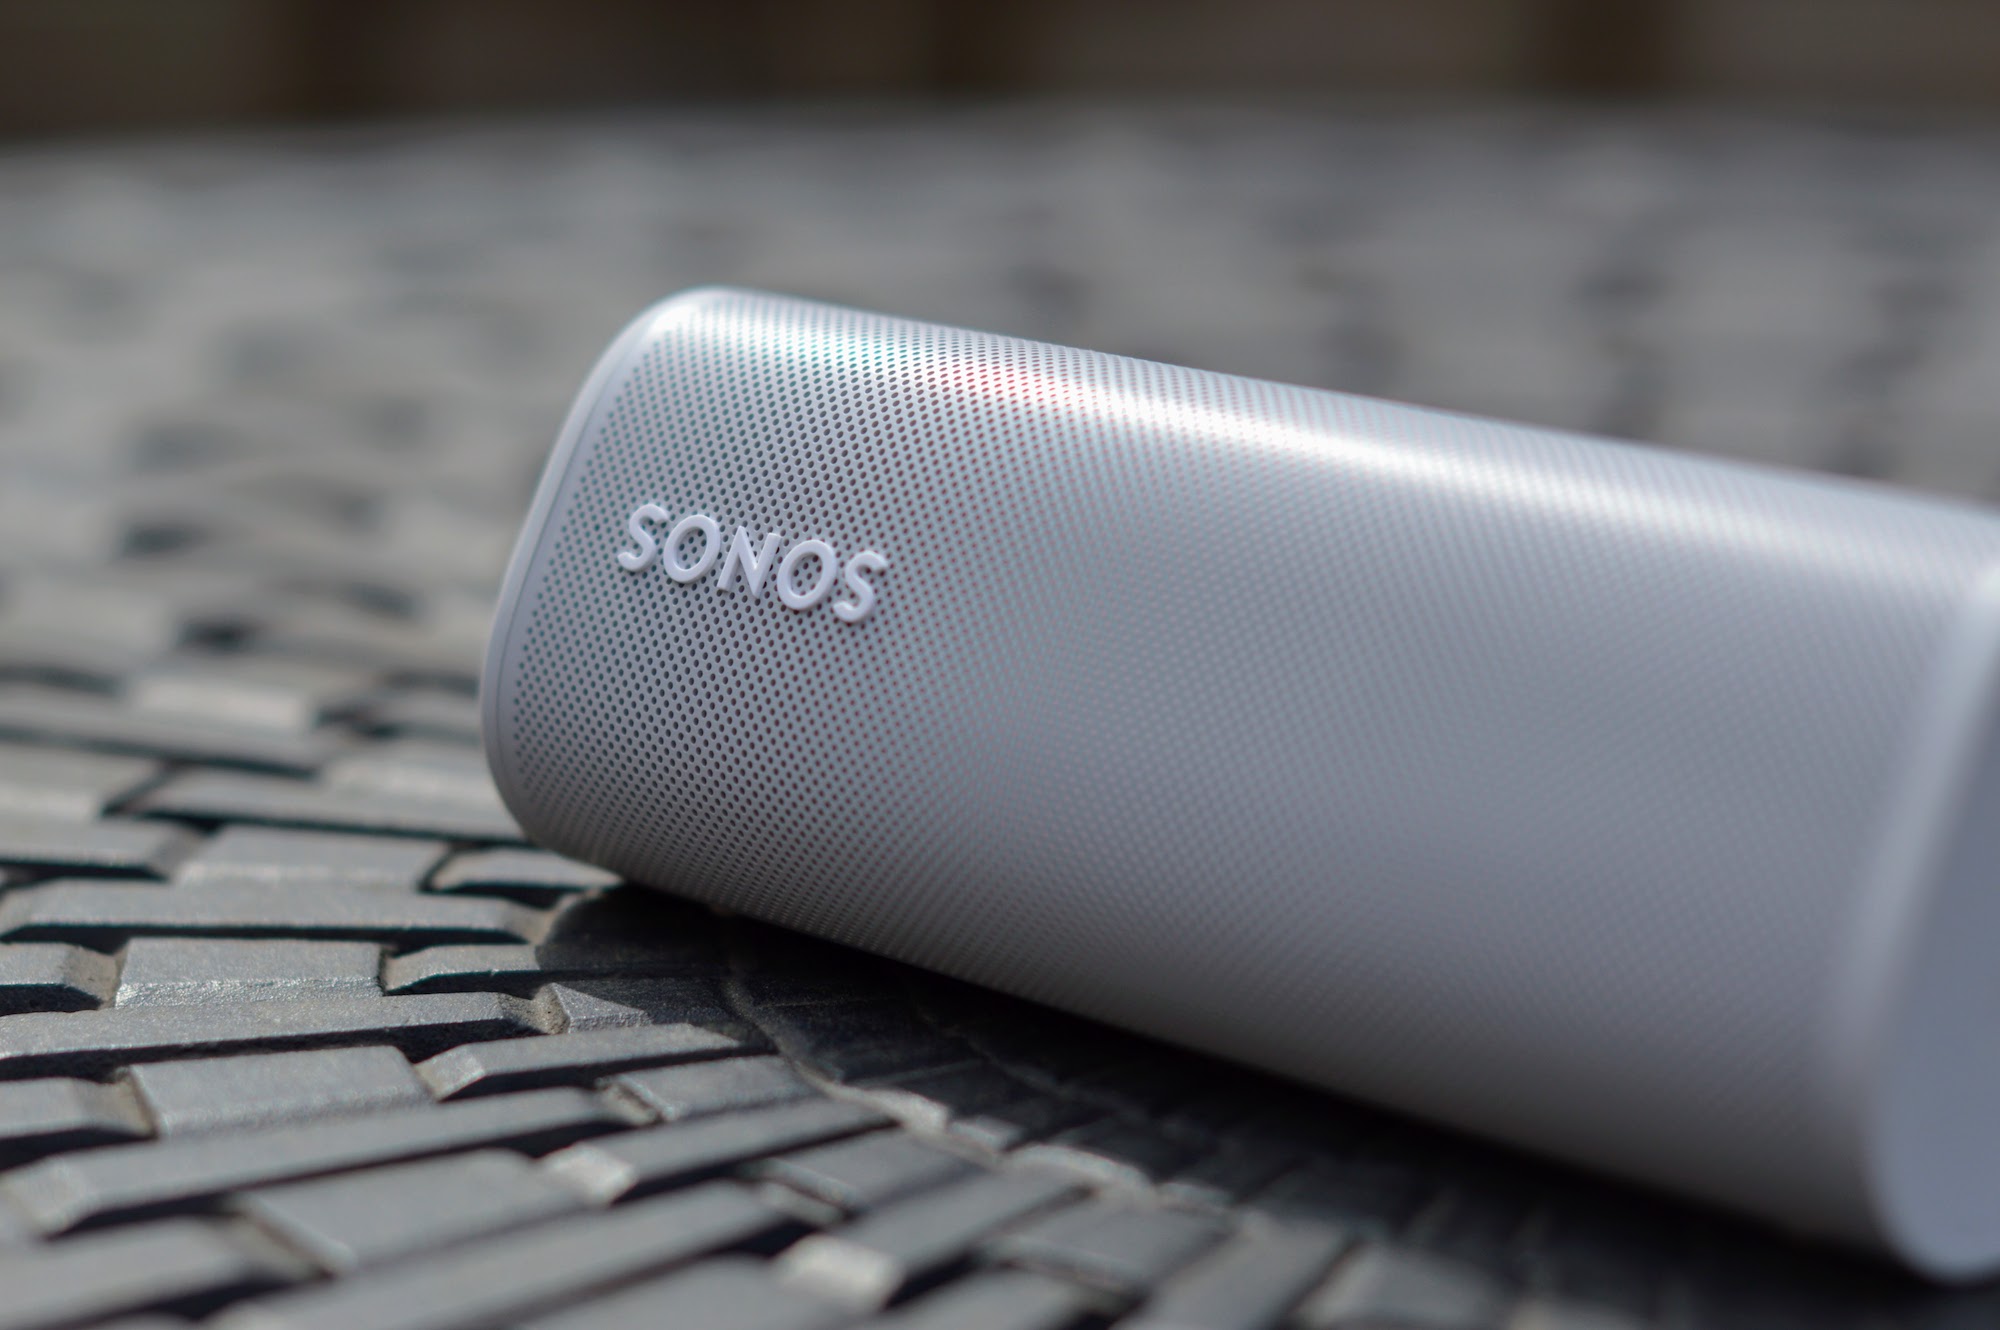 Intakt tilbage sangtekster How To Get the Most Out of Connecting Alexa and Sonos | Digital Trends